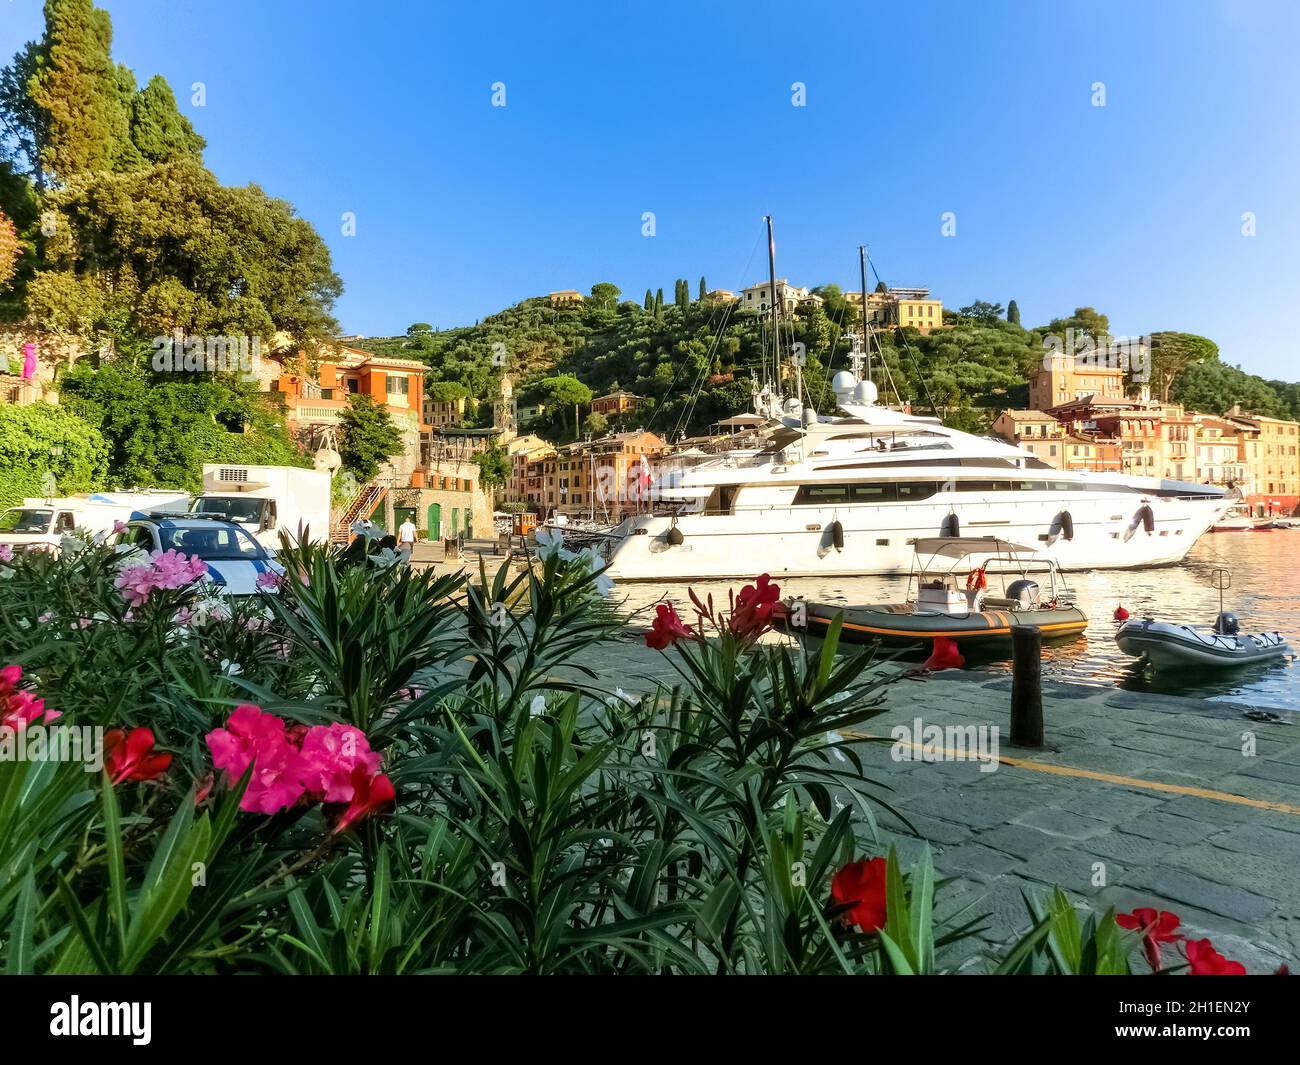 Beautiful bay with colorful houses in Portofino, Liguria, at Italy Stock Photo